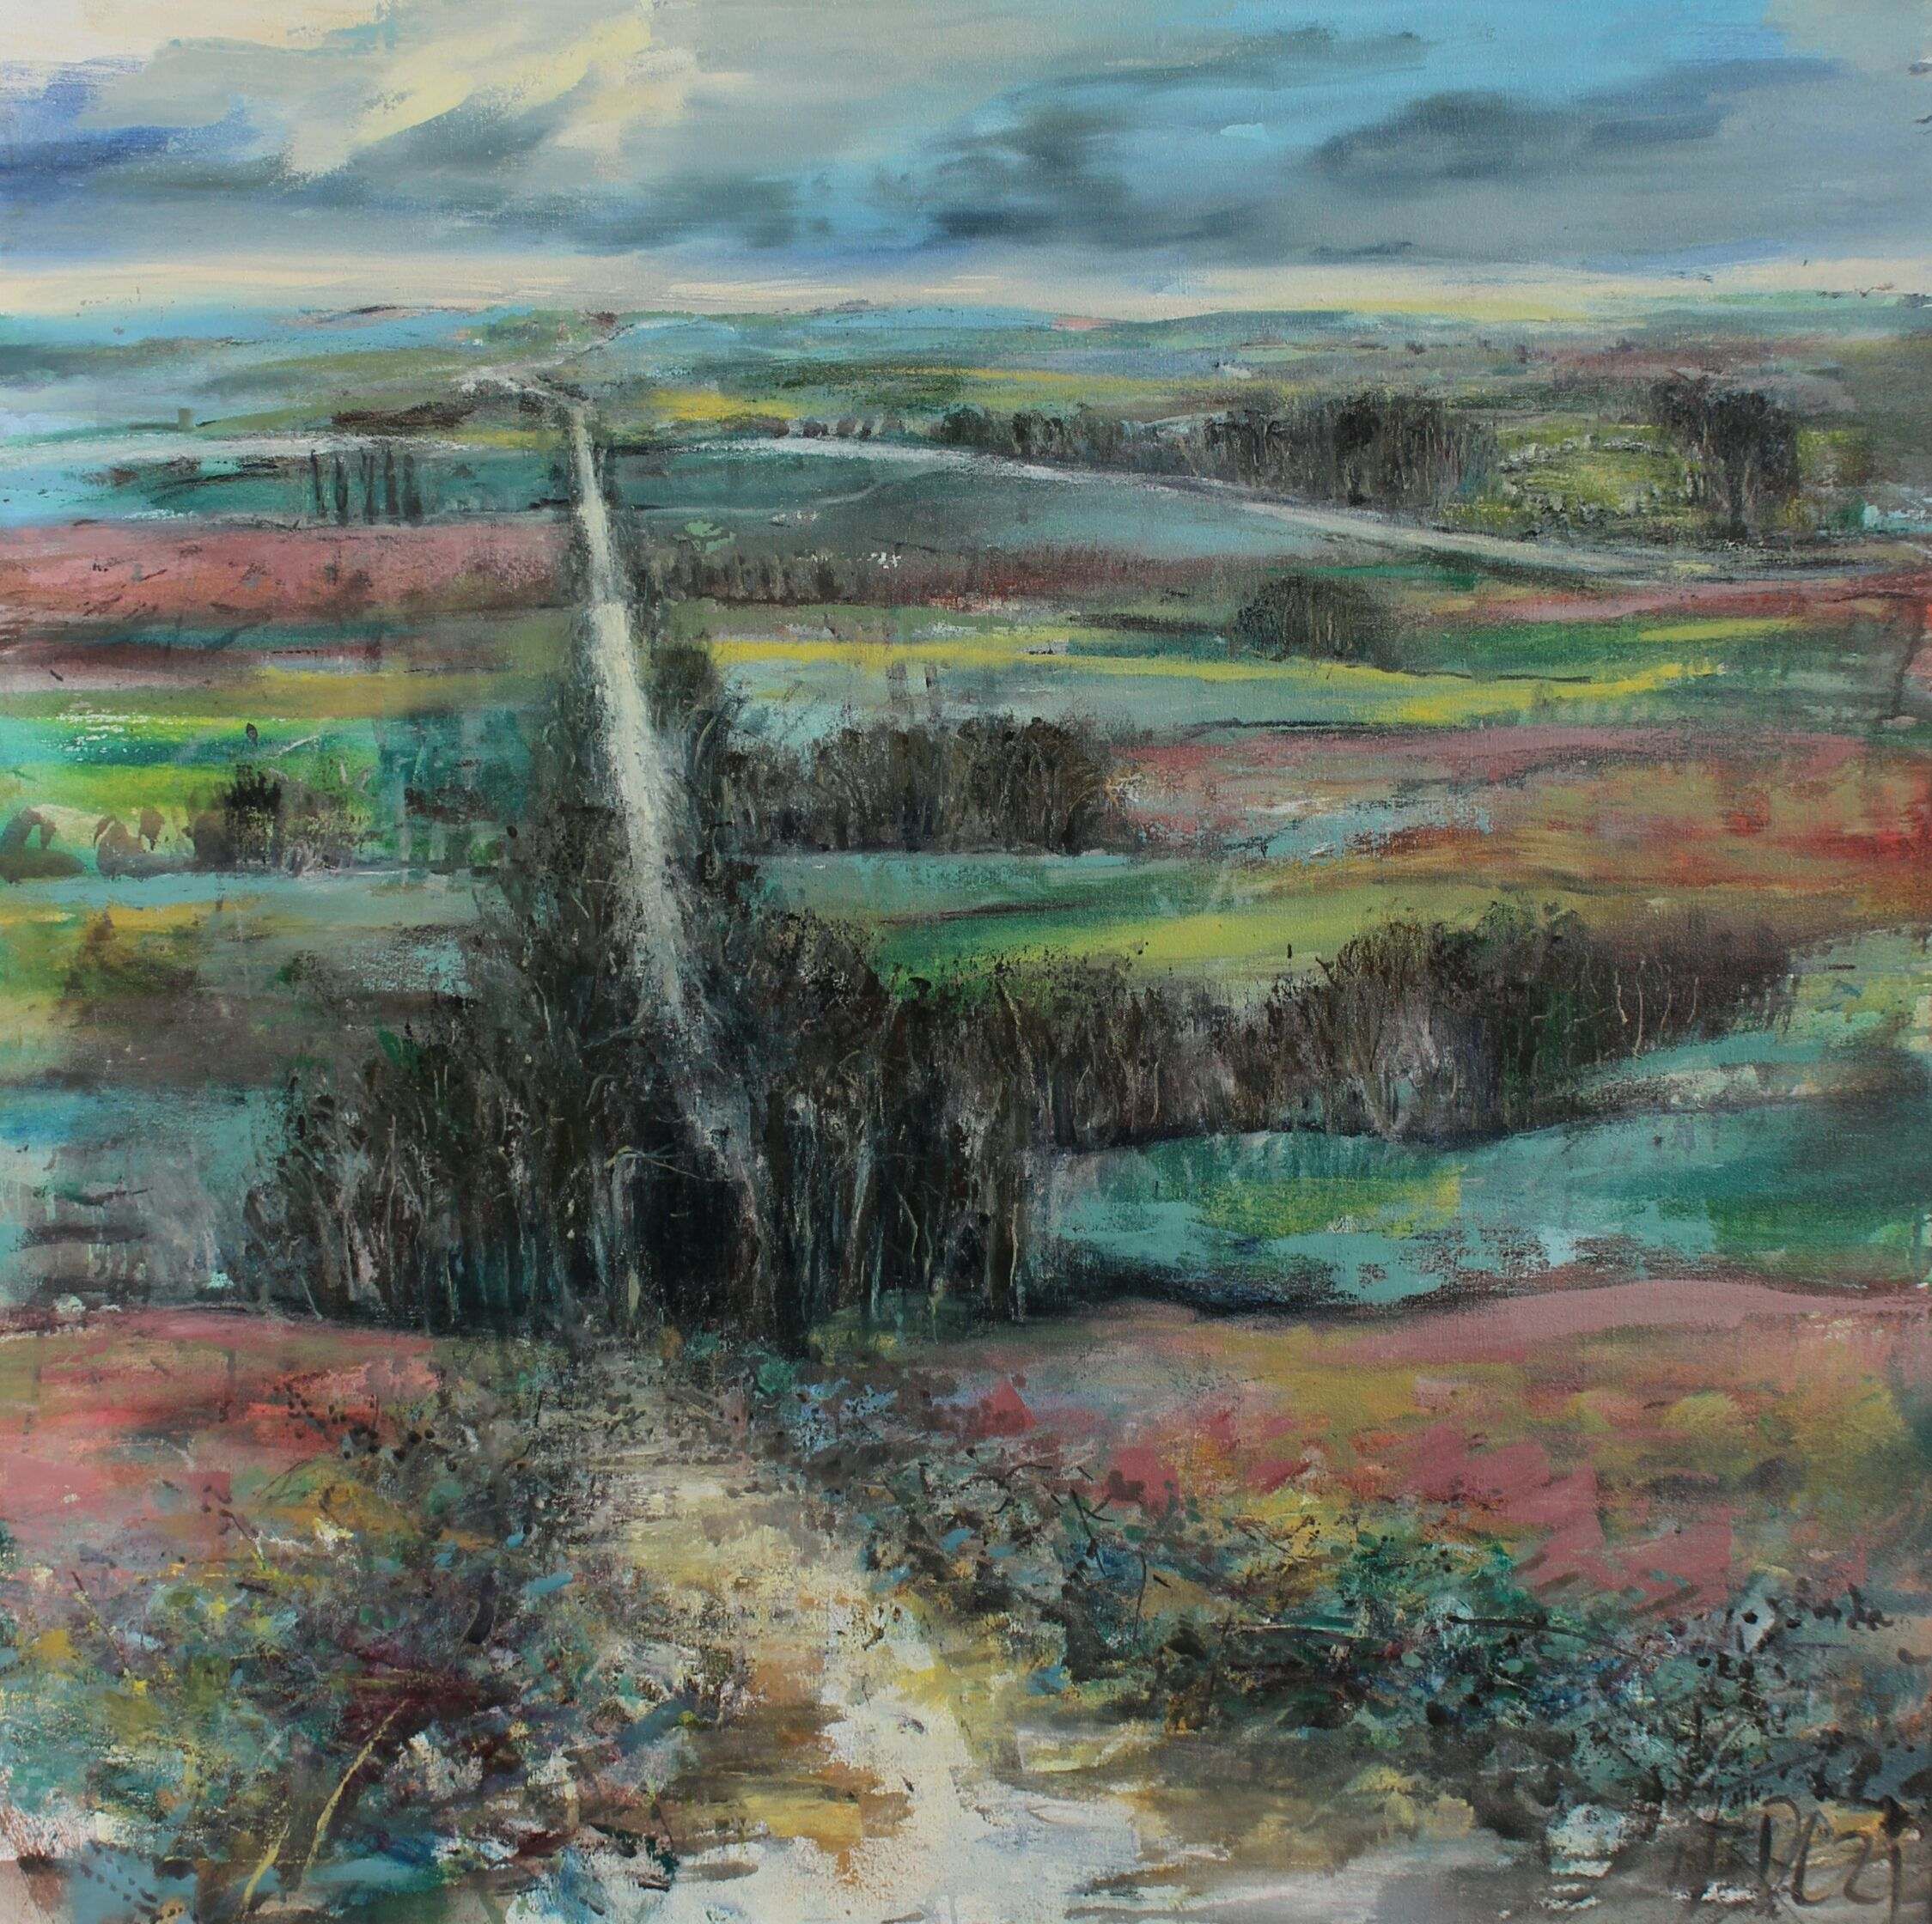 Ditch, Hedge Lane and Rollright Stones, impressionistic landscape painting by David Hugh Lockett